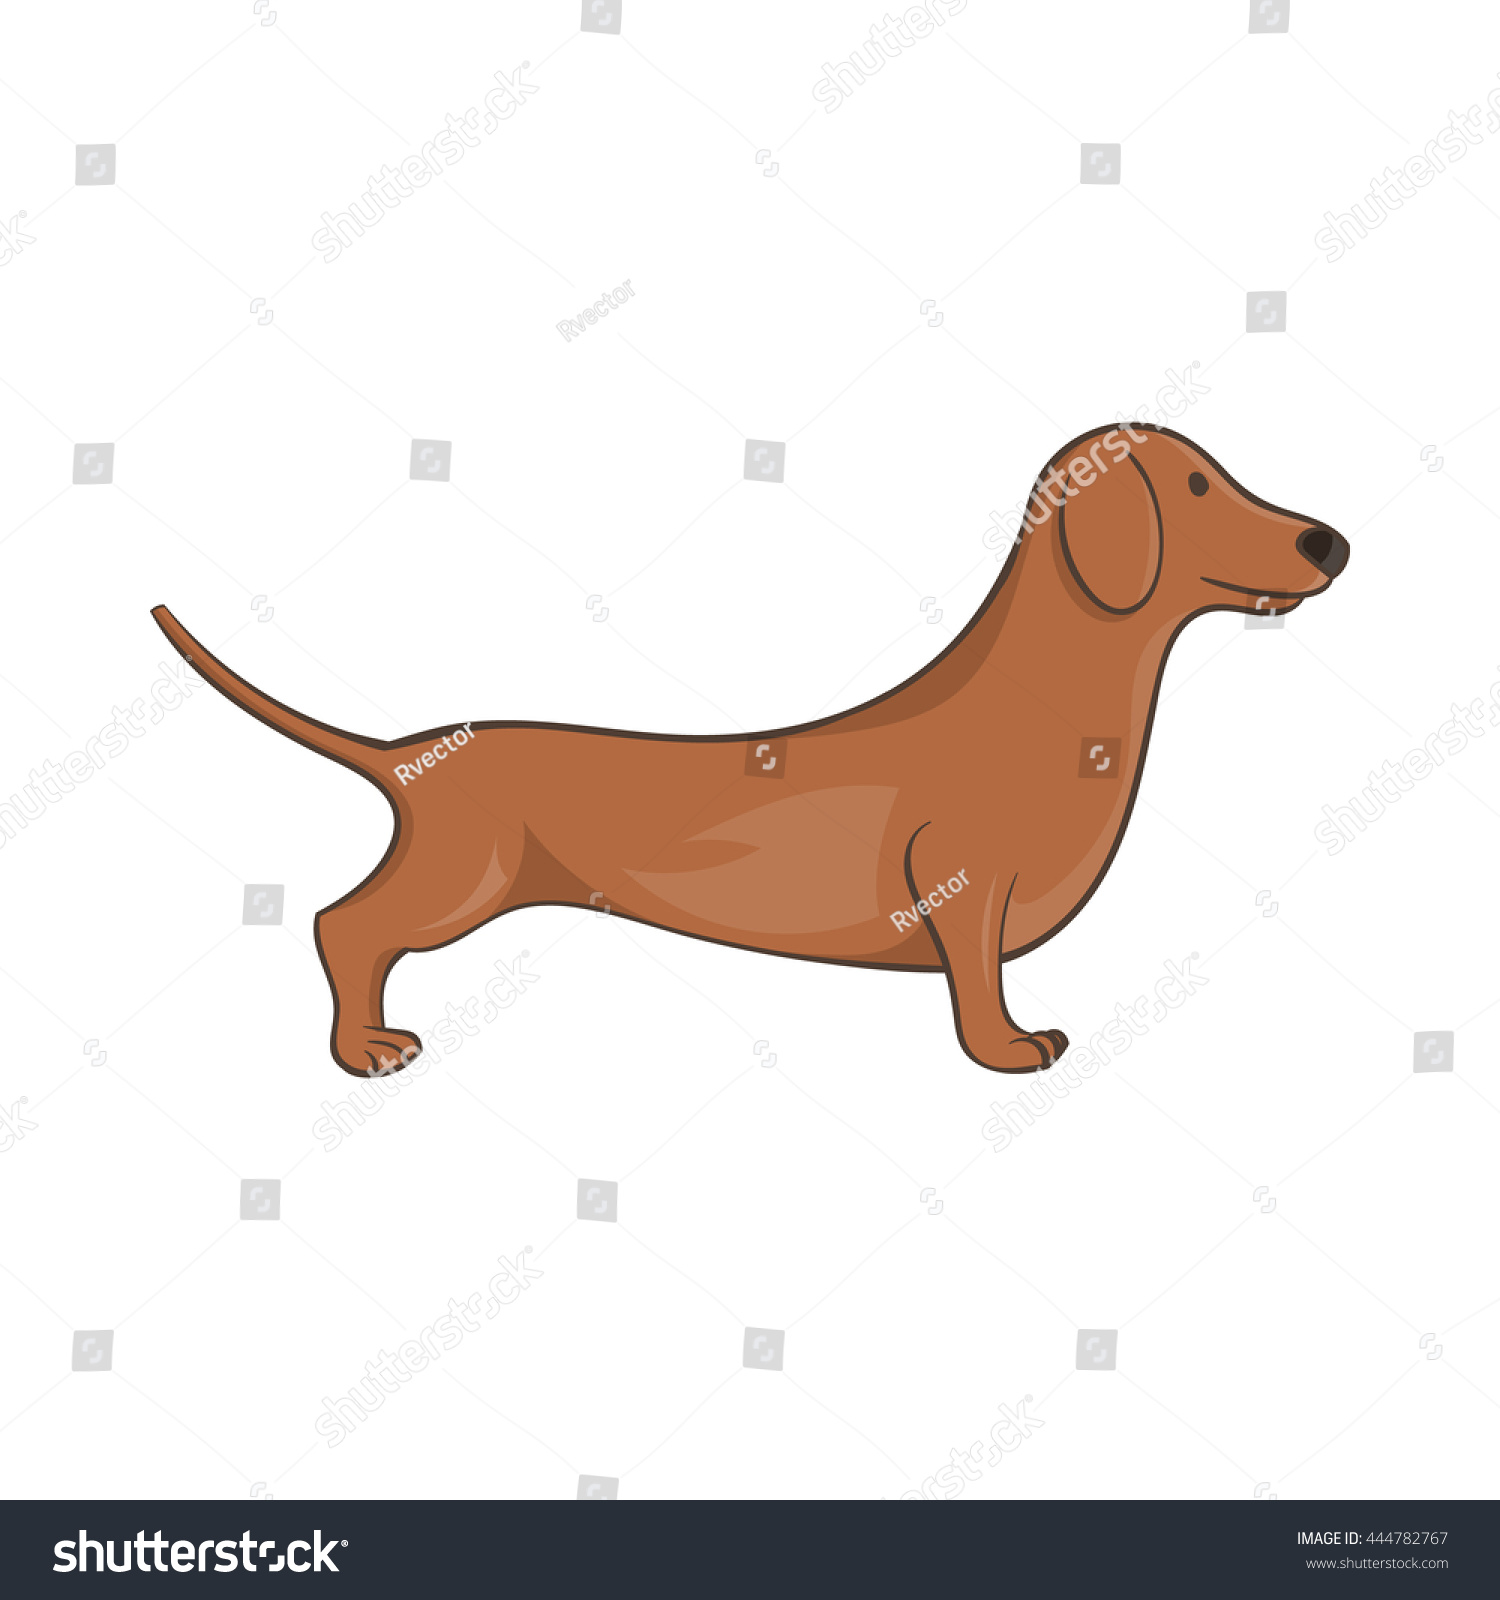 SVG of Brown dachshund dog icon in cartoon style on a white background svg